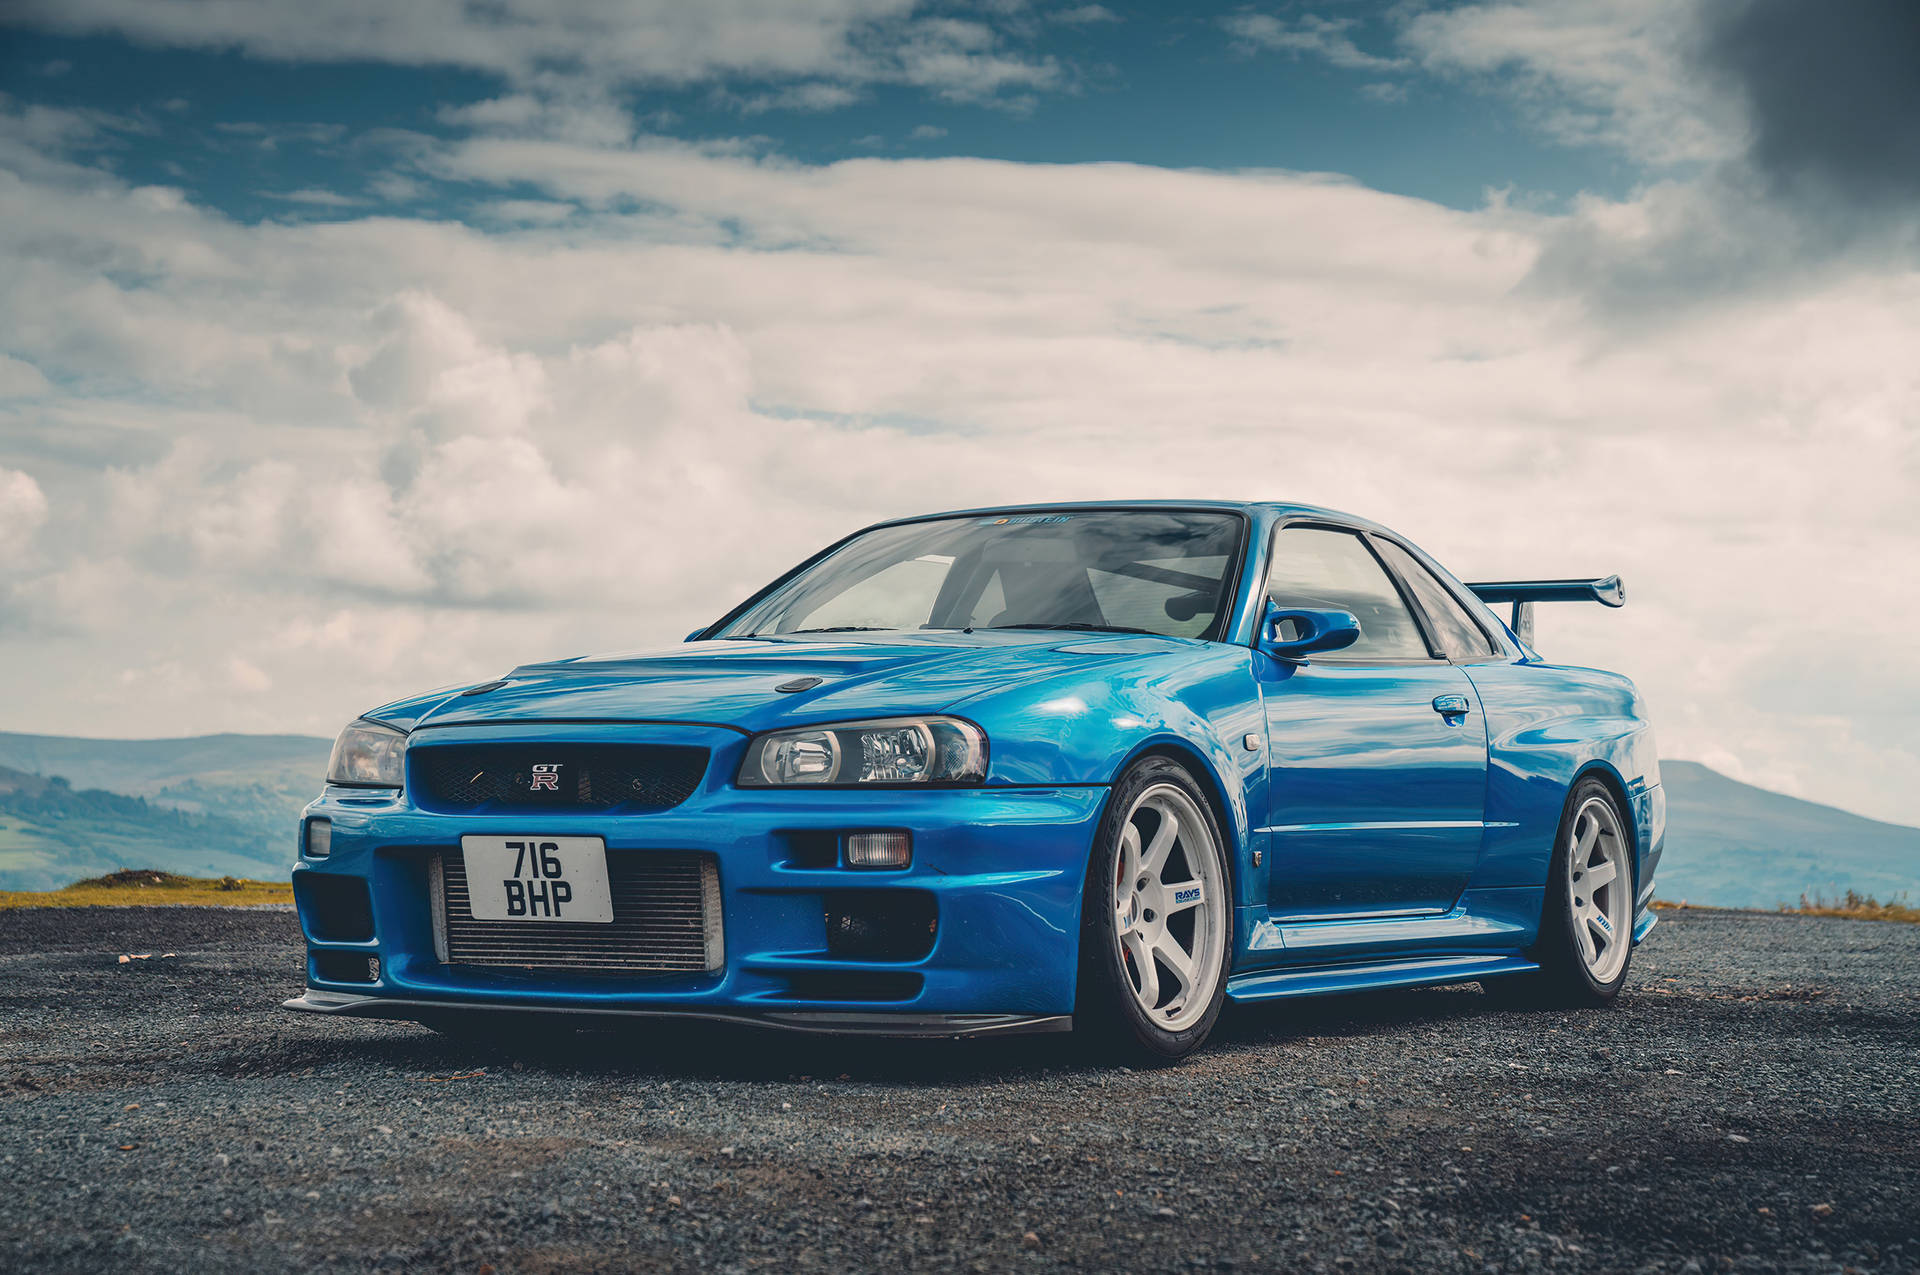 20+ Nissan Skyline R34 HD Wallpapers and Backgrounds